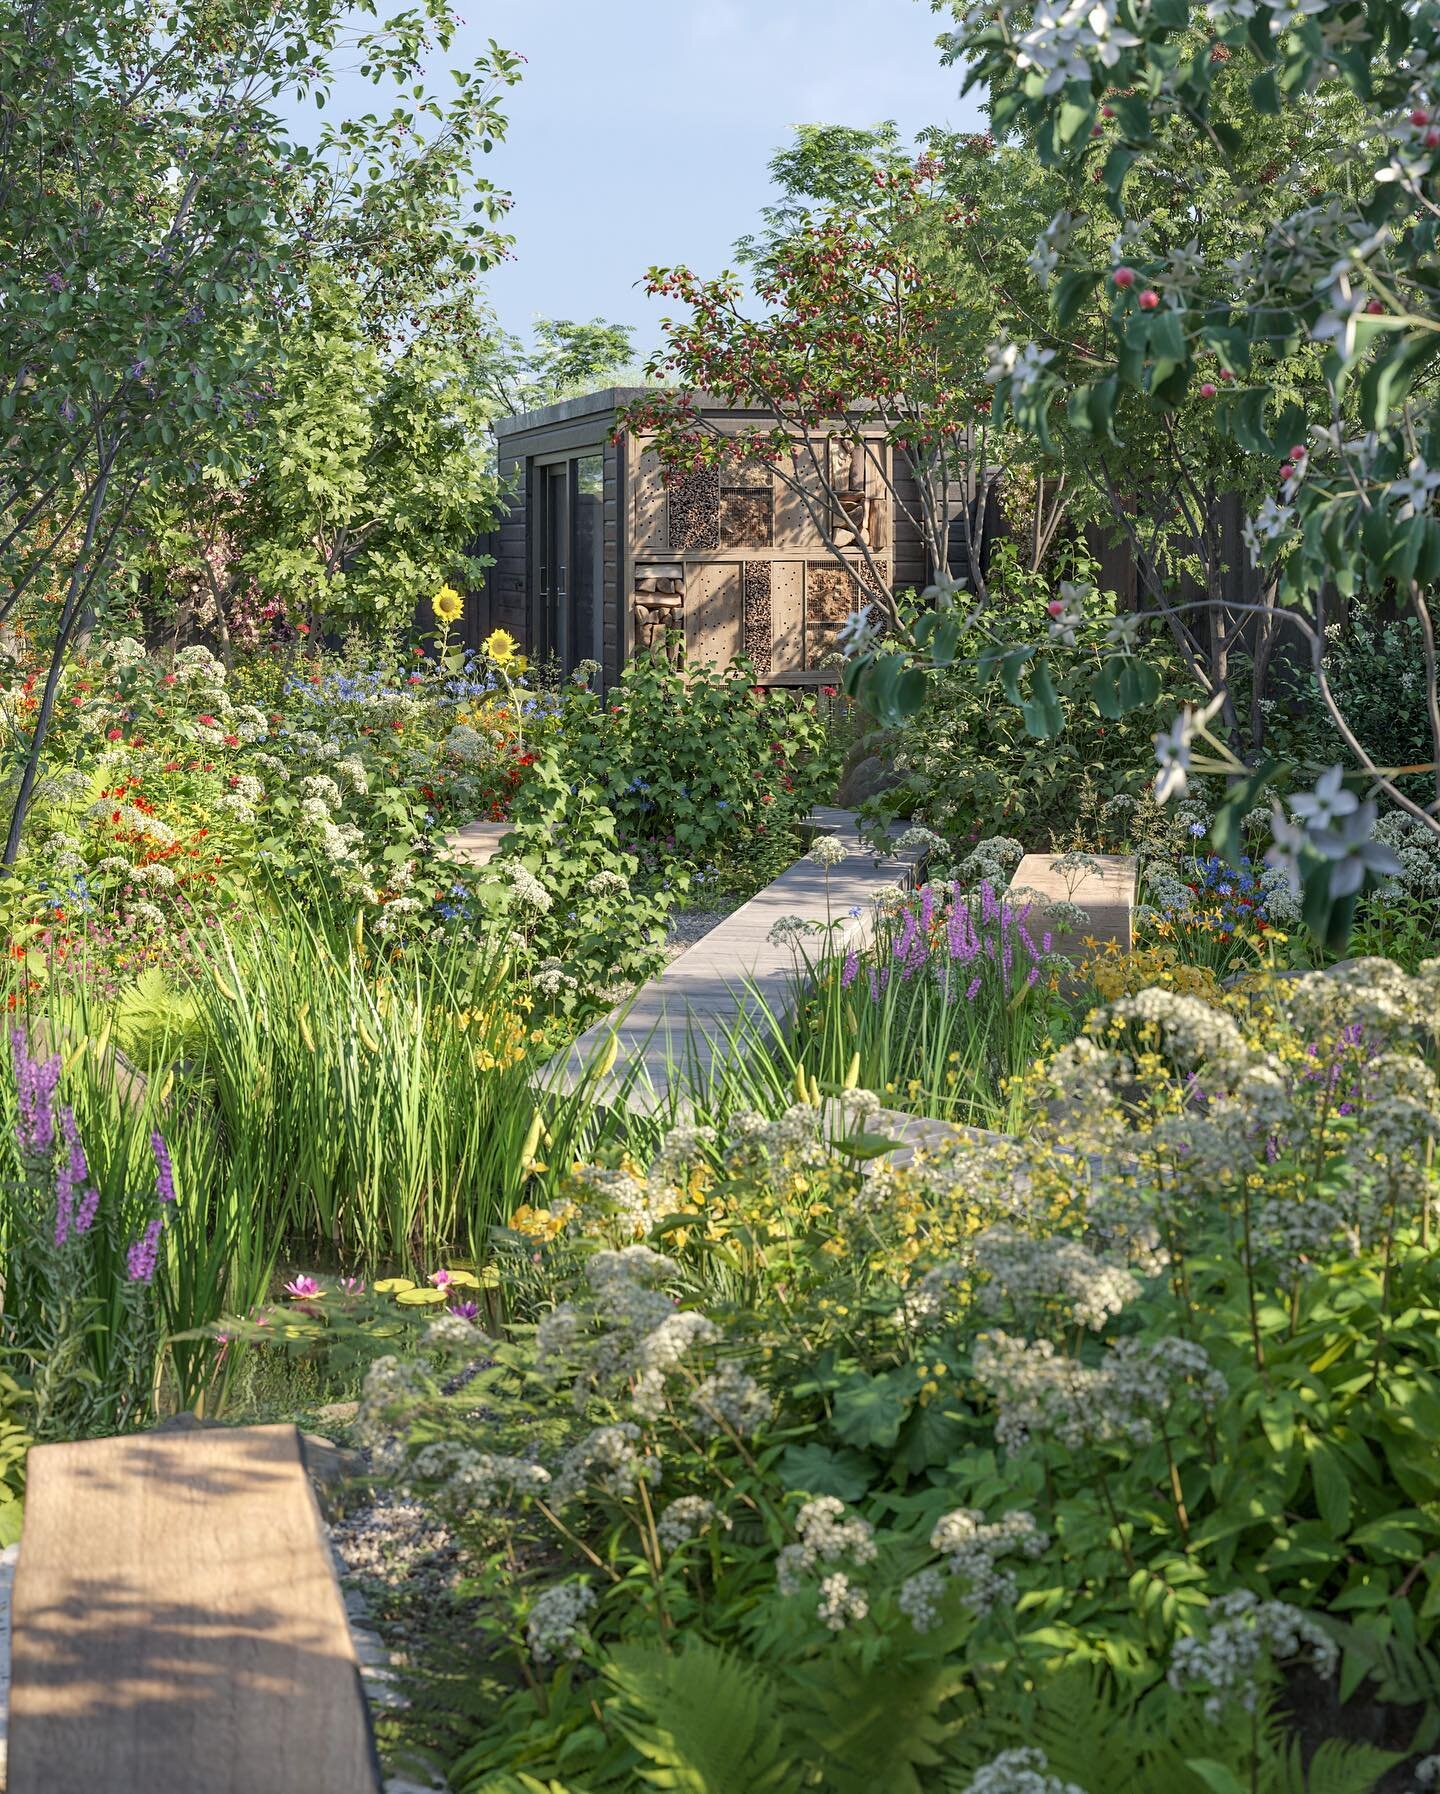 RHS Resilient Garden is out on Thursday! Preorder links in my bio &amp; available in bookshops from the 6th April.

An exciting element of the book that I can finally reveal is that we have created a virtual garden to illustrate design ideas in the b